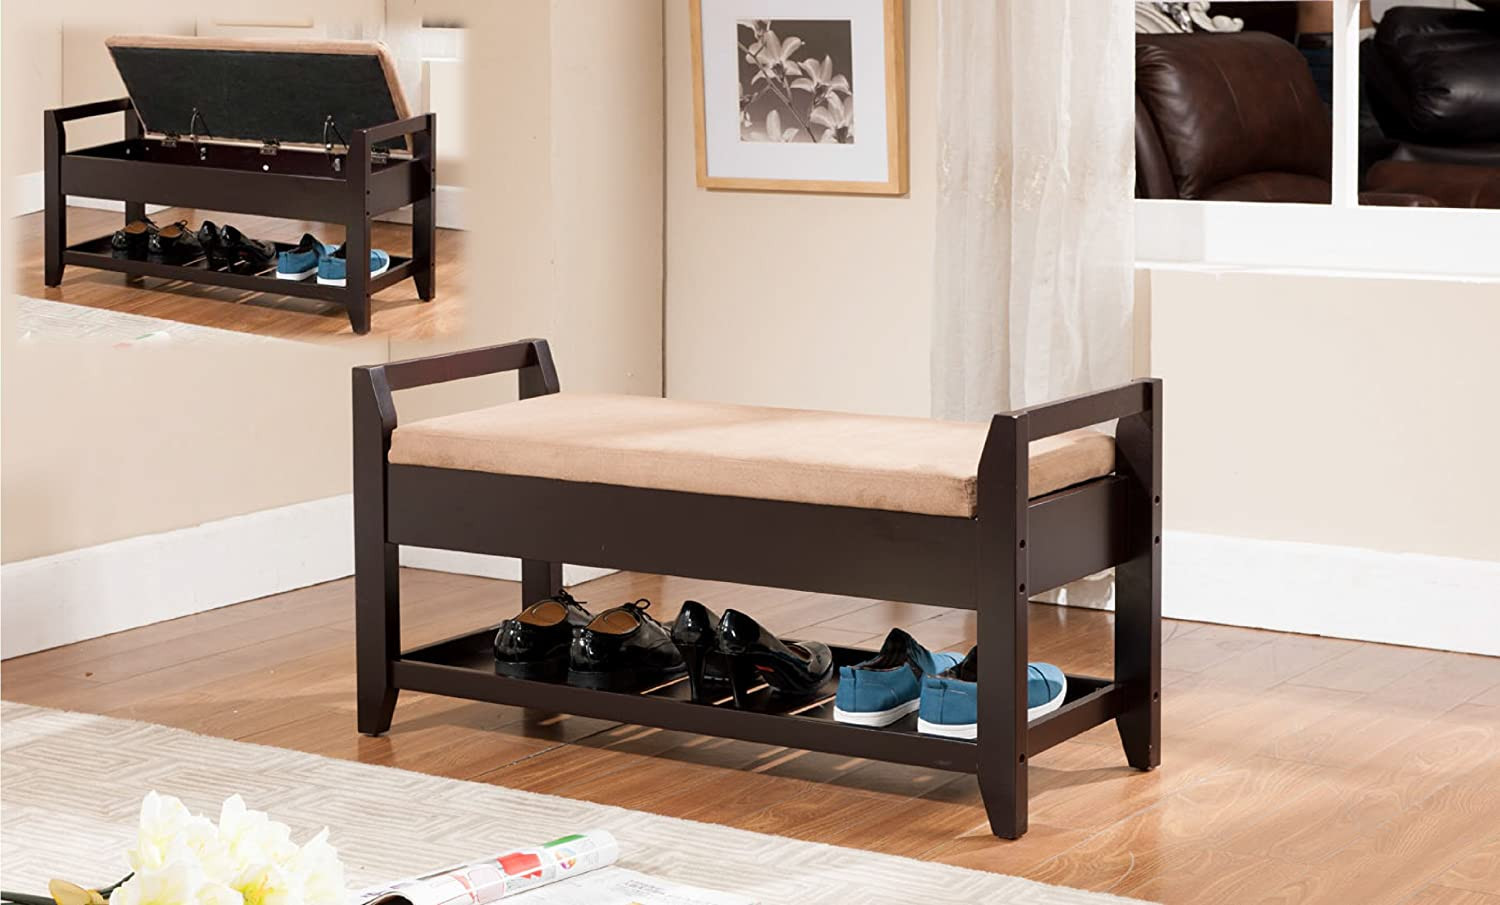 Shoe Storage Bench With Cushion
 Kings Brand Espresso Finish Wood Shoe Storage Bench With